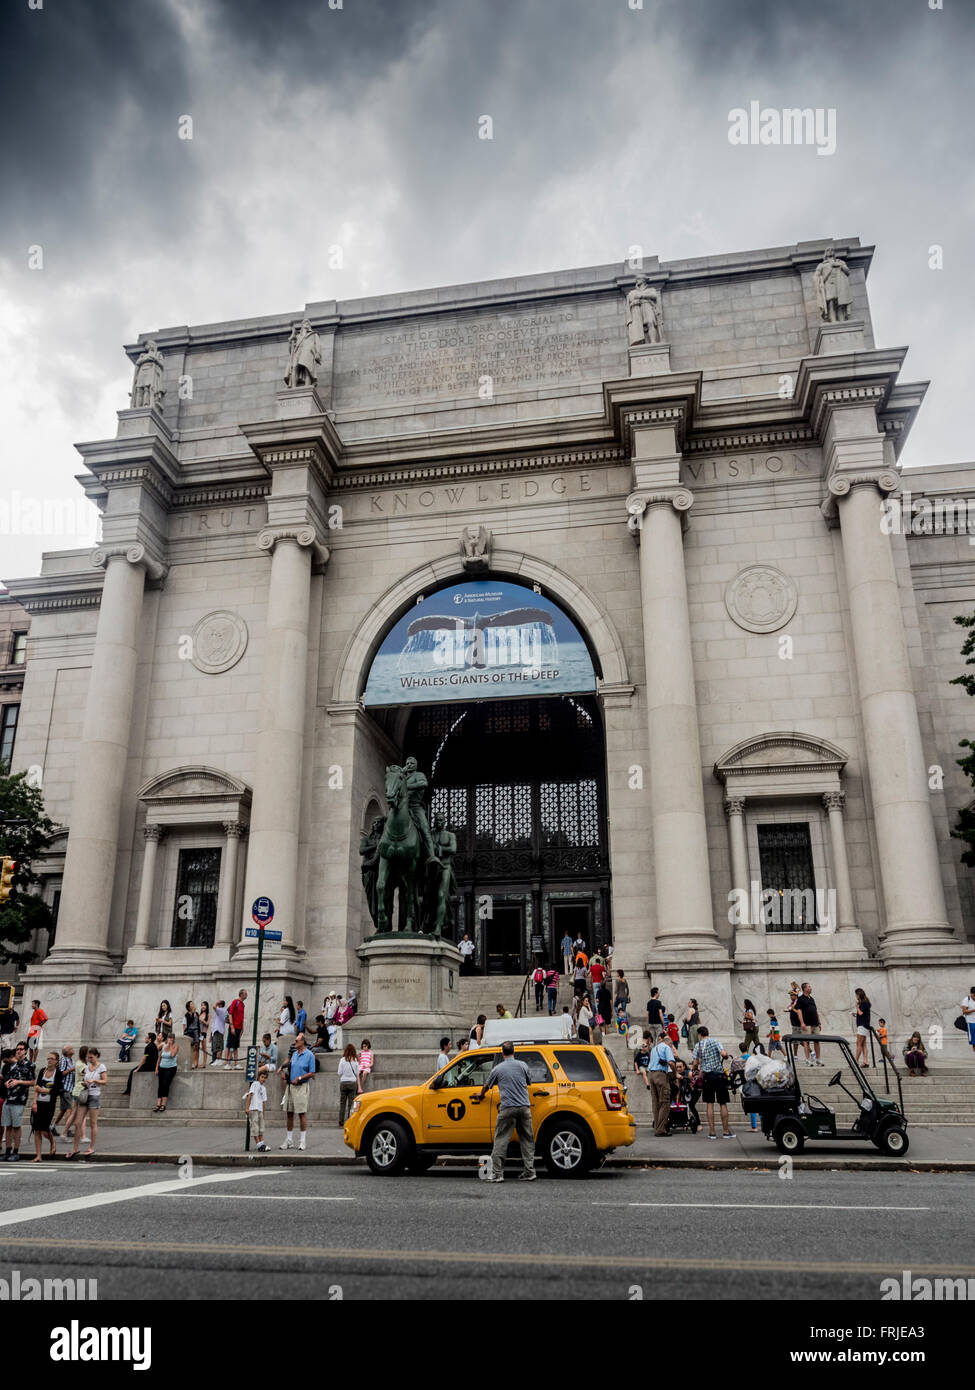 American Museum of Natural History, Central Park West at 79th Street New York, USA. Stock Photo